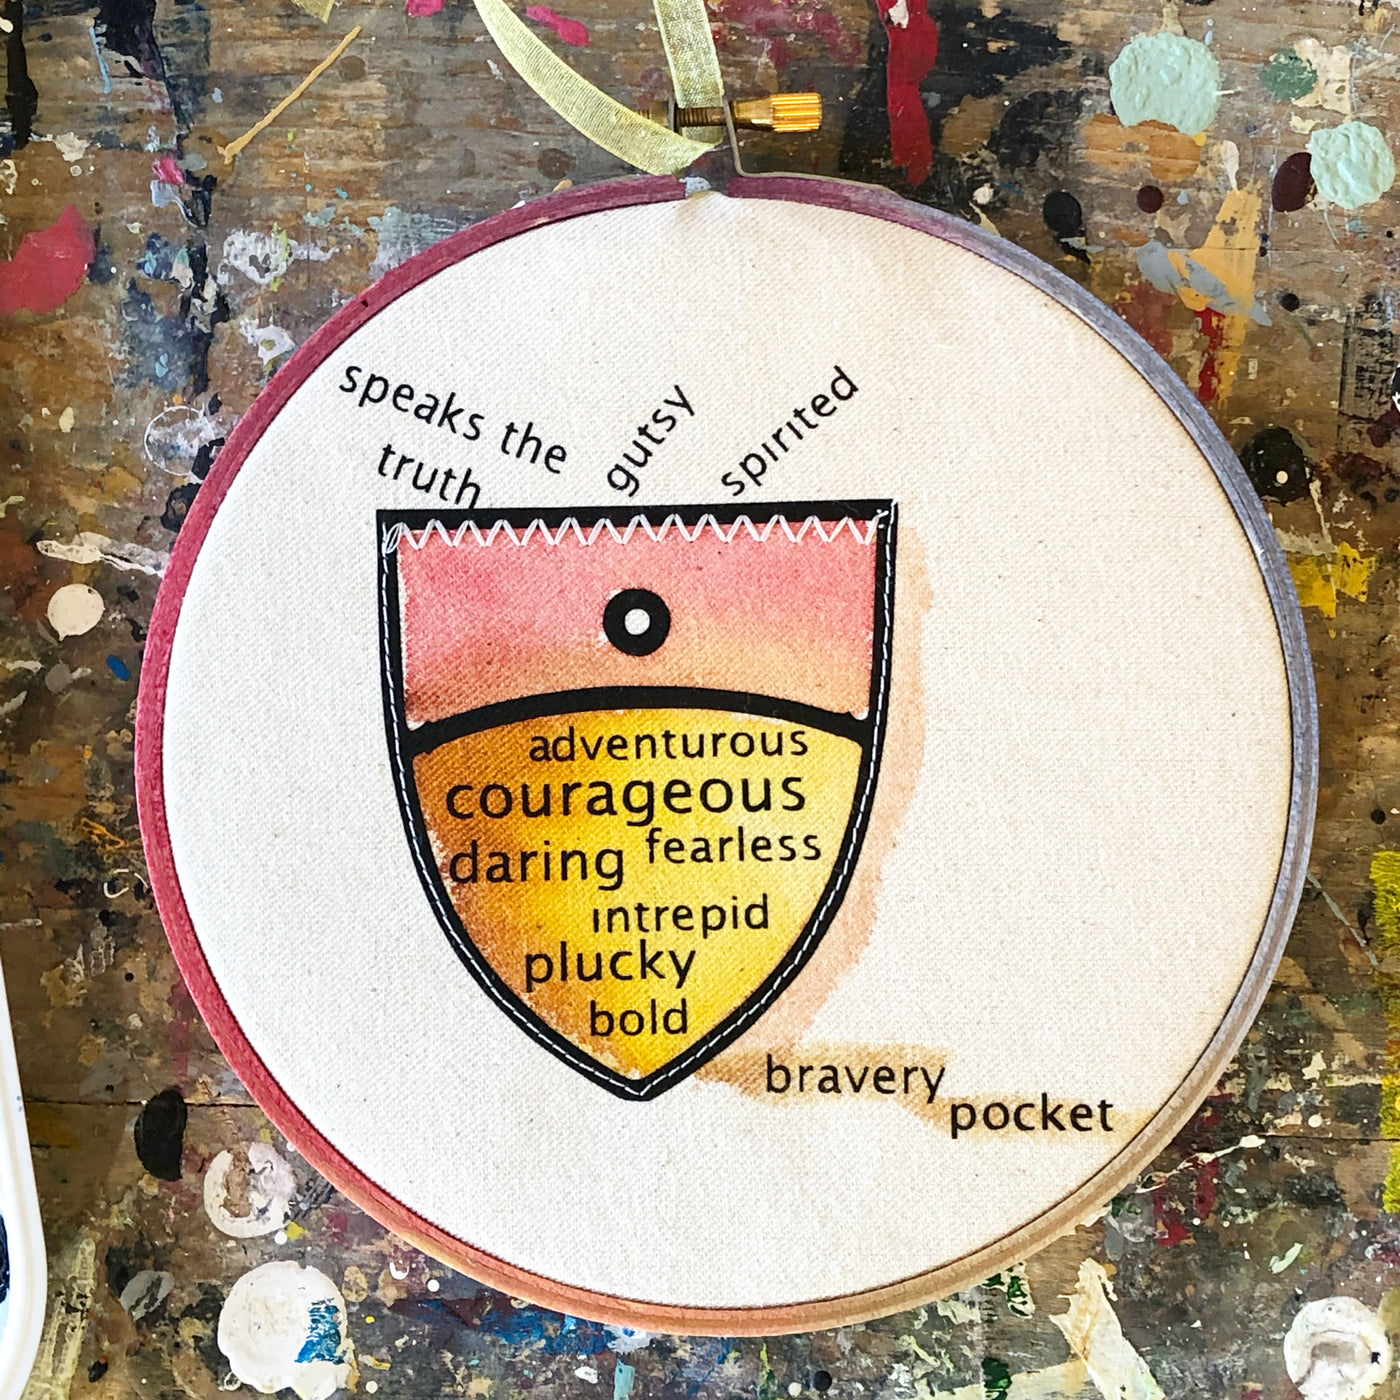 round painted wooden hoop with canvas and a painted pocket shape, filled with words about bravery, such as speaks the truth, gutsy, spirited, adventurous, courageous, fearless, daring, intrepid, plucky and bold 